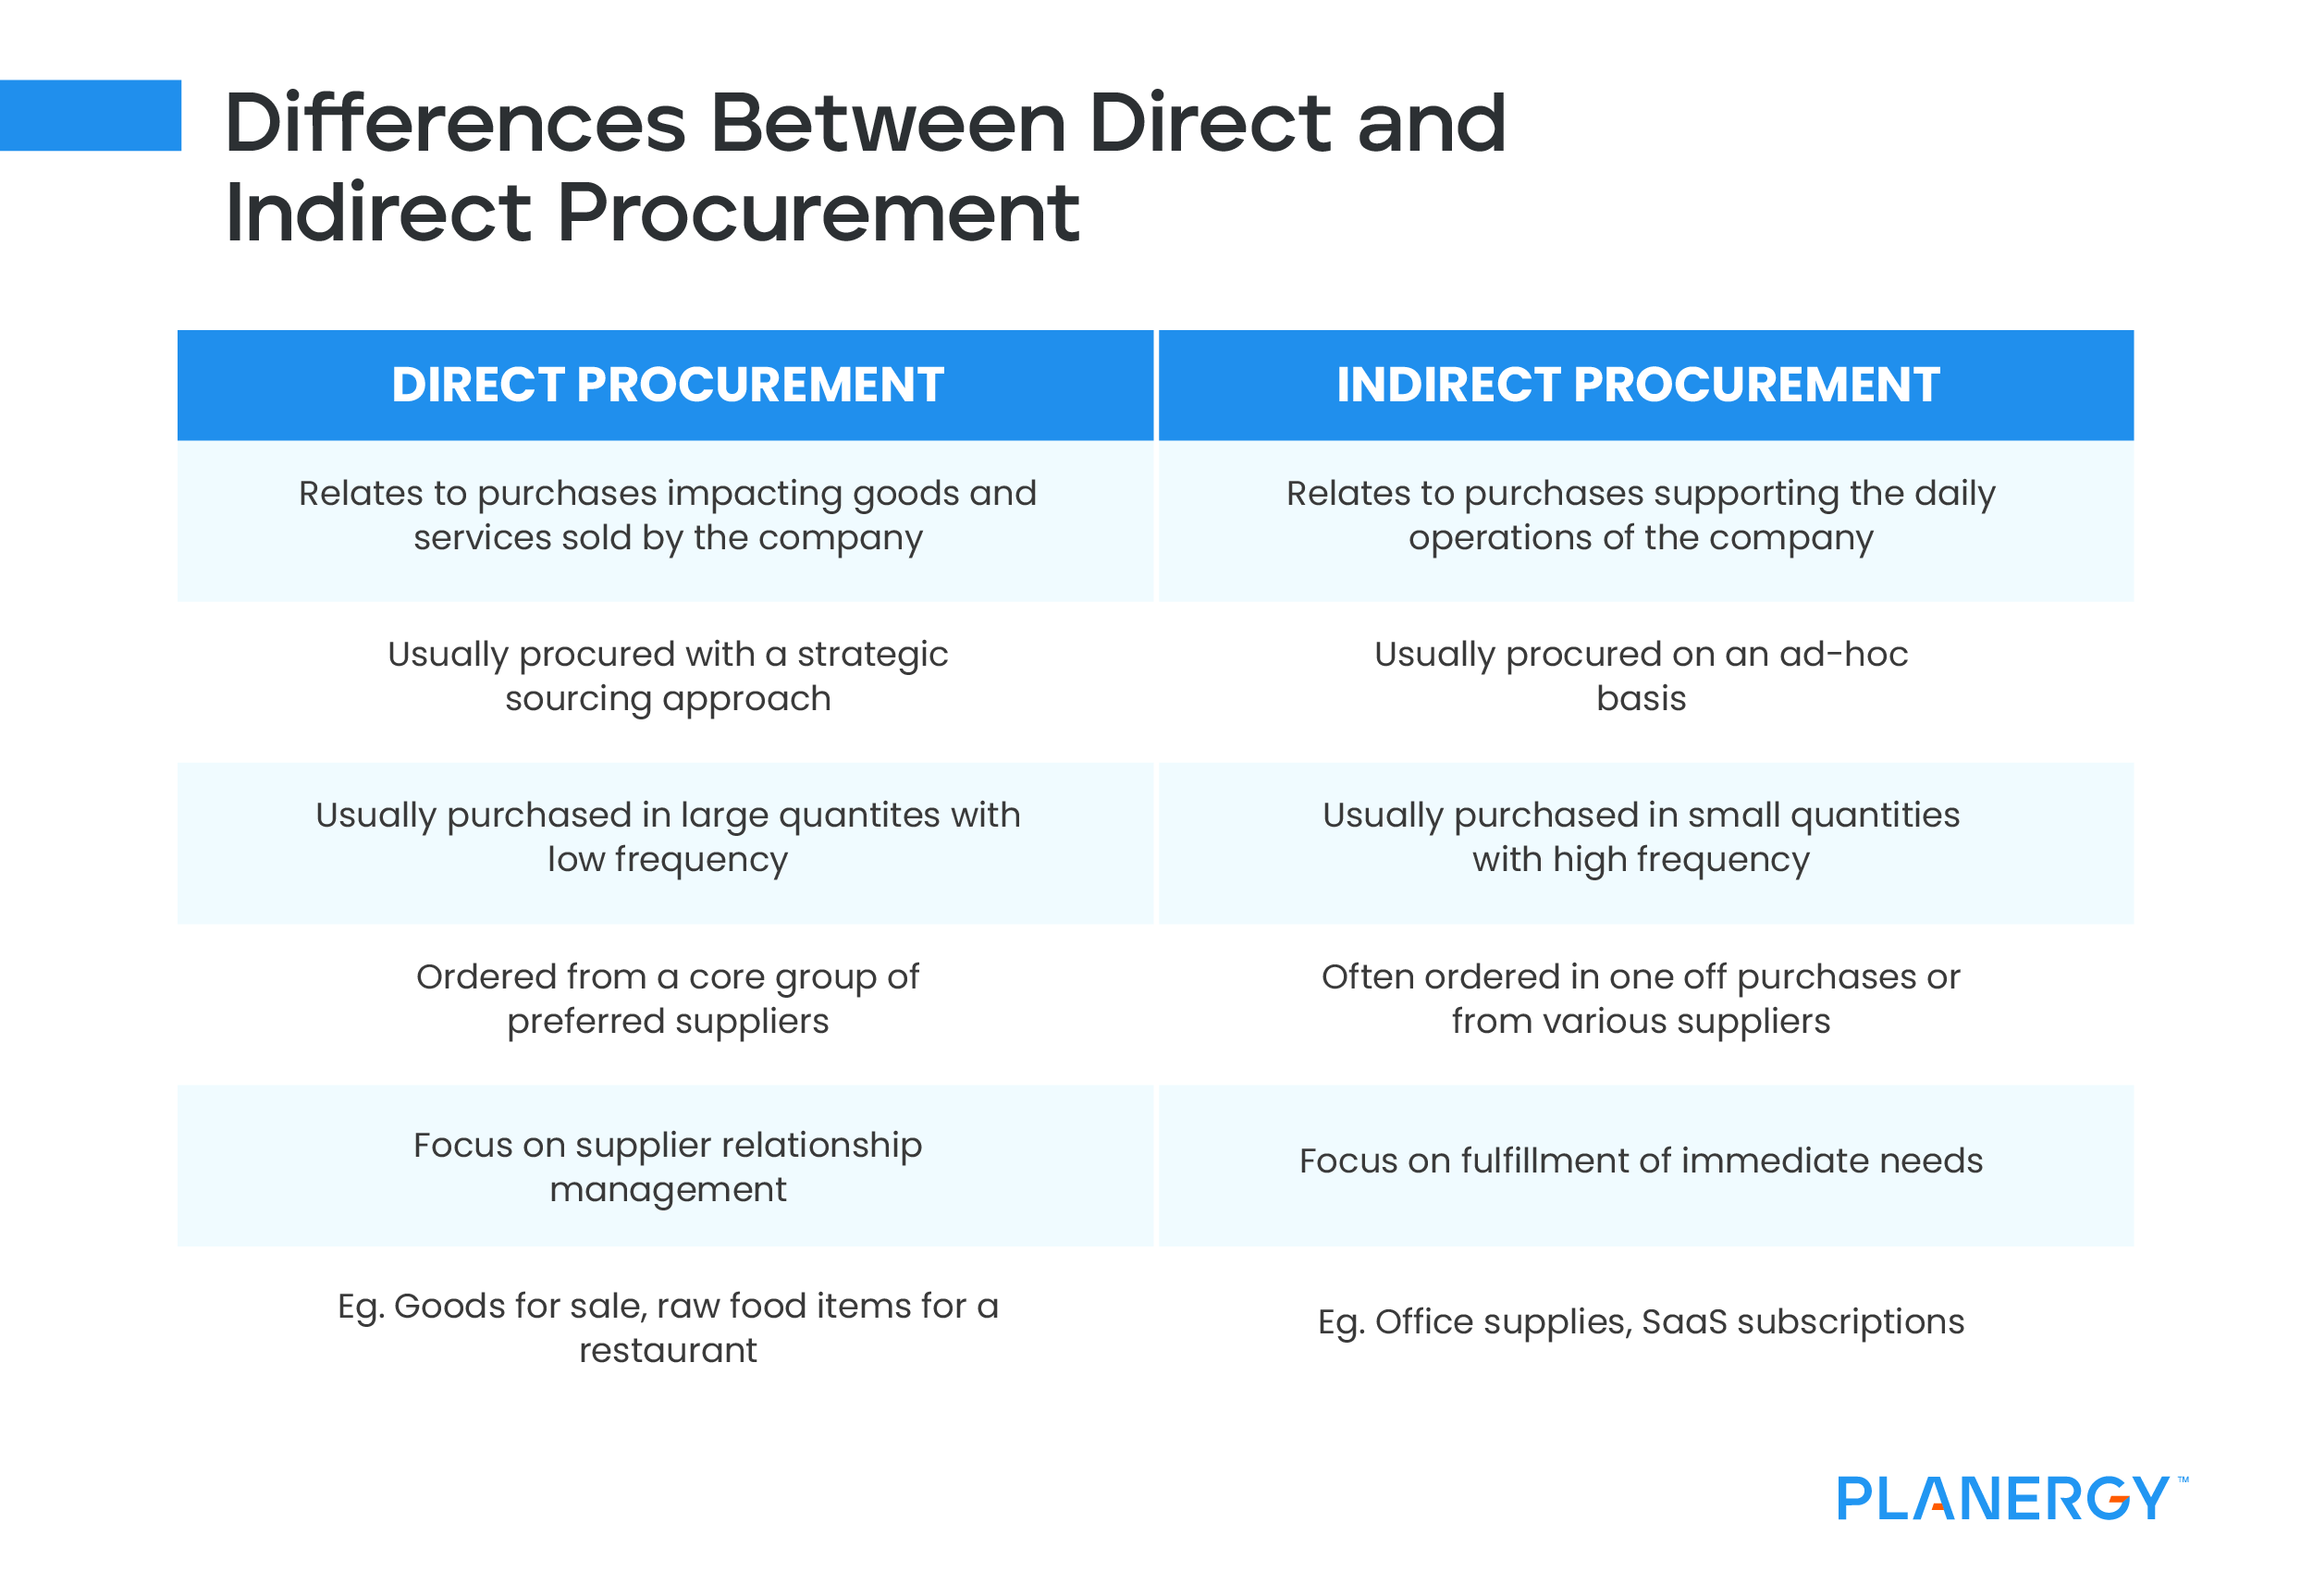 Differences Between Direct and Indirect Procurement